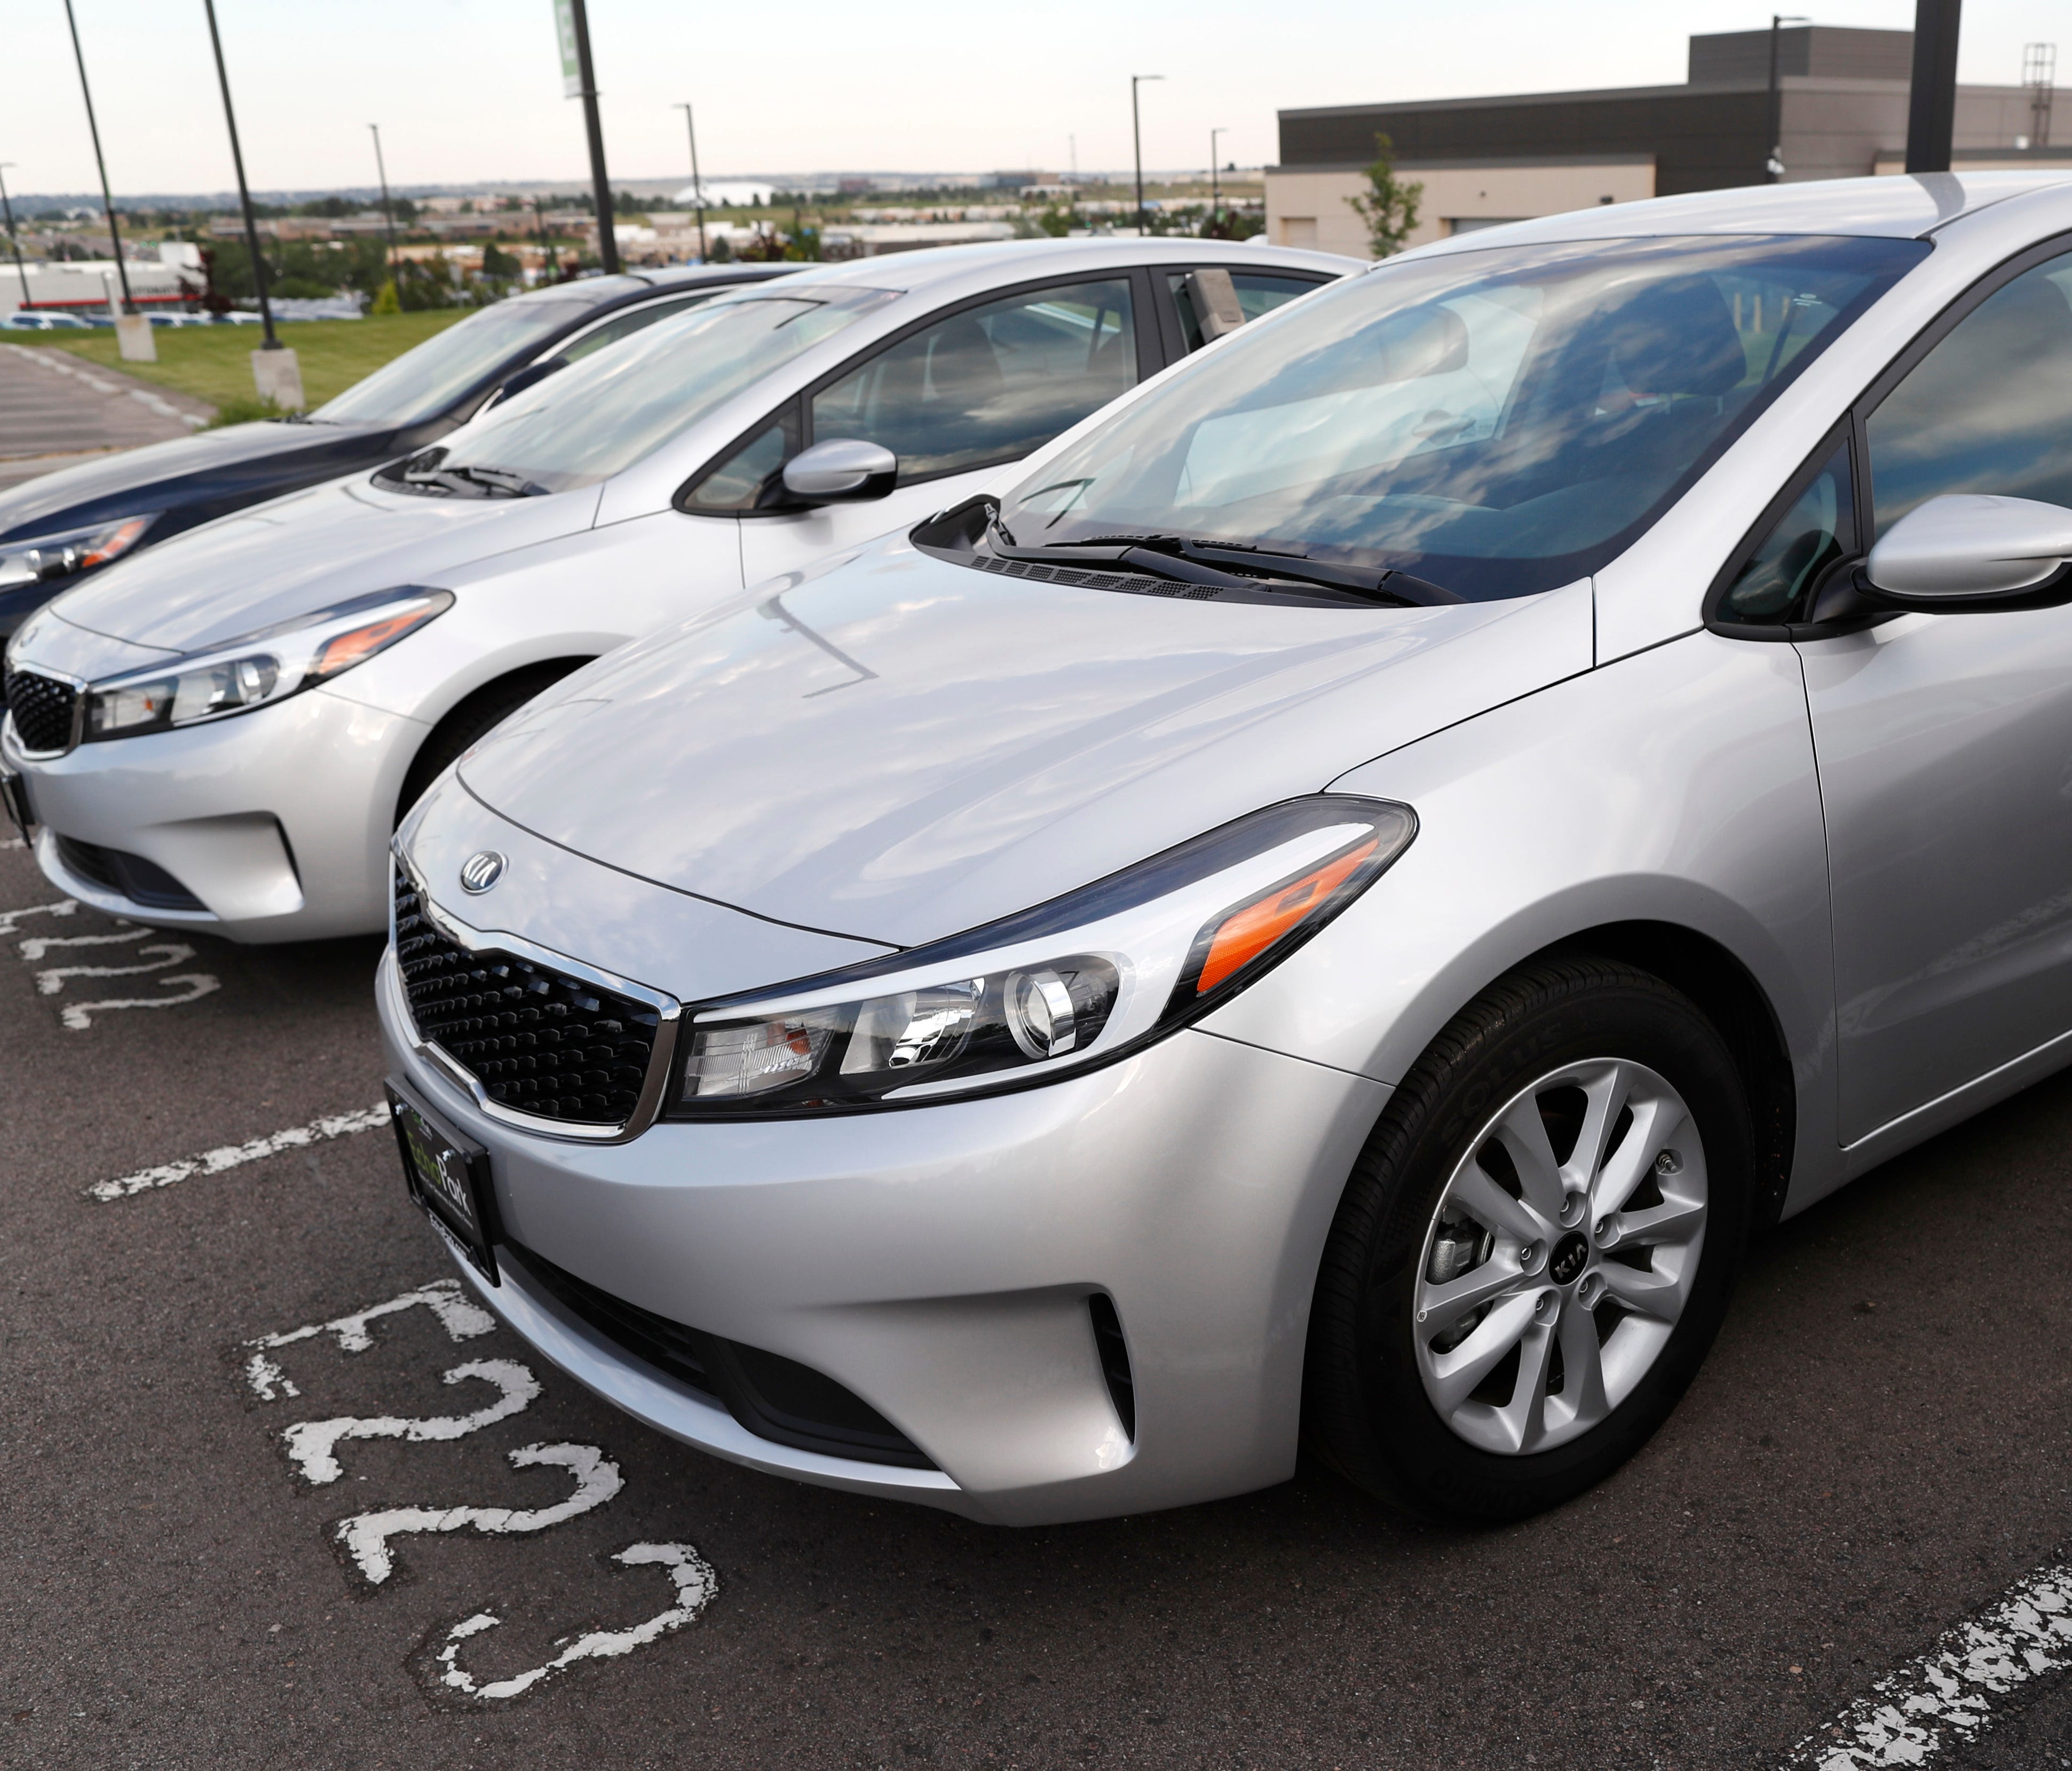 A used 2017 Kia Forte sits in a row of other used, late-model sedans at a dealership in Centennial, Colo. Prices of used small cars are on the rise after falling for the past five years.